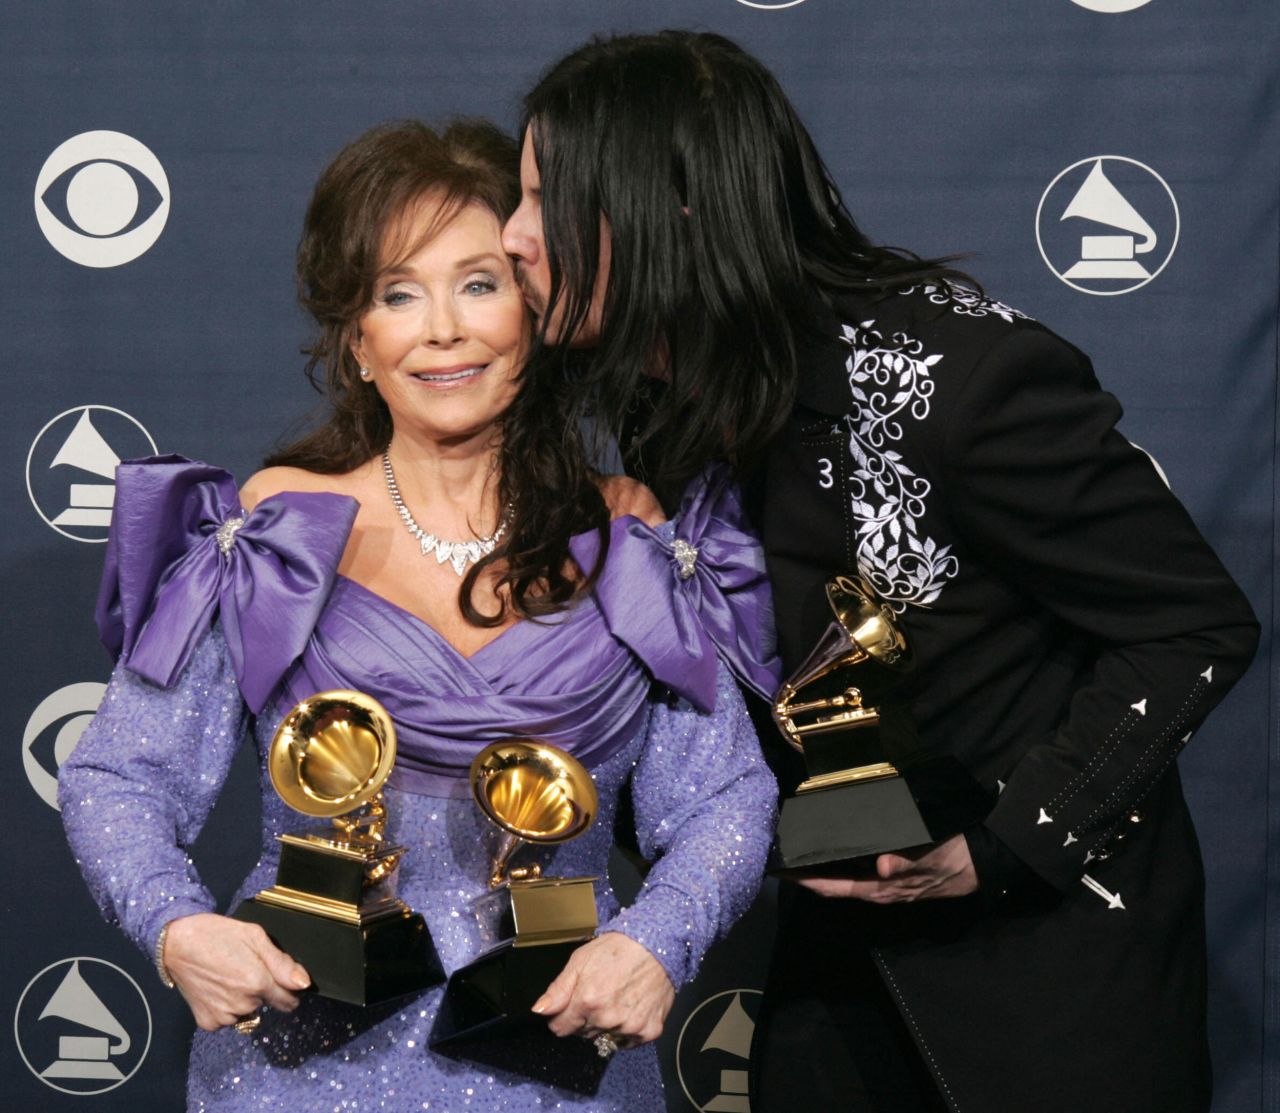 Jack White gives a kiss to Lynn after winning a Grammy together for best country collaboration in Los Angeles in February 2005. White produced her album "Van Lear Rose."